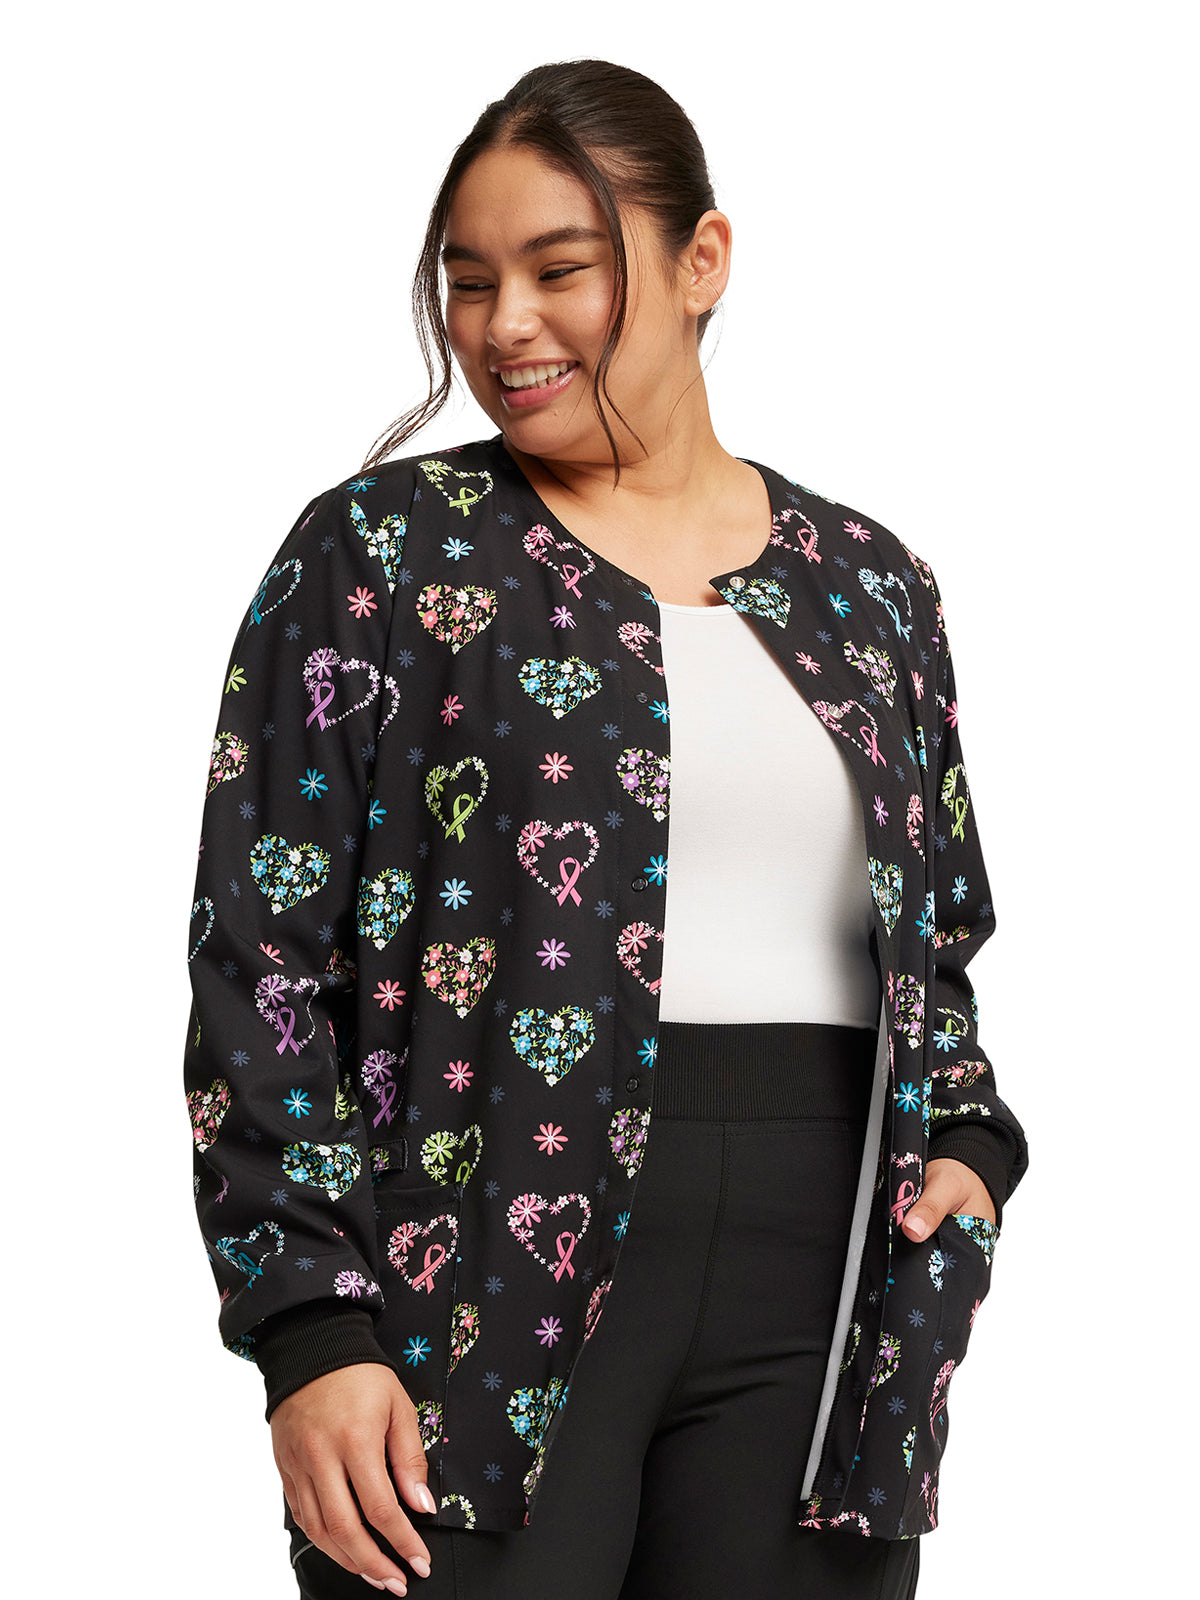 Women's Snap Front Print Warm-up Jacket